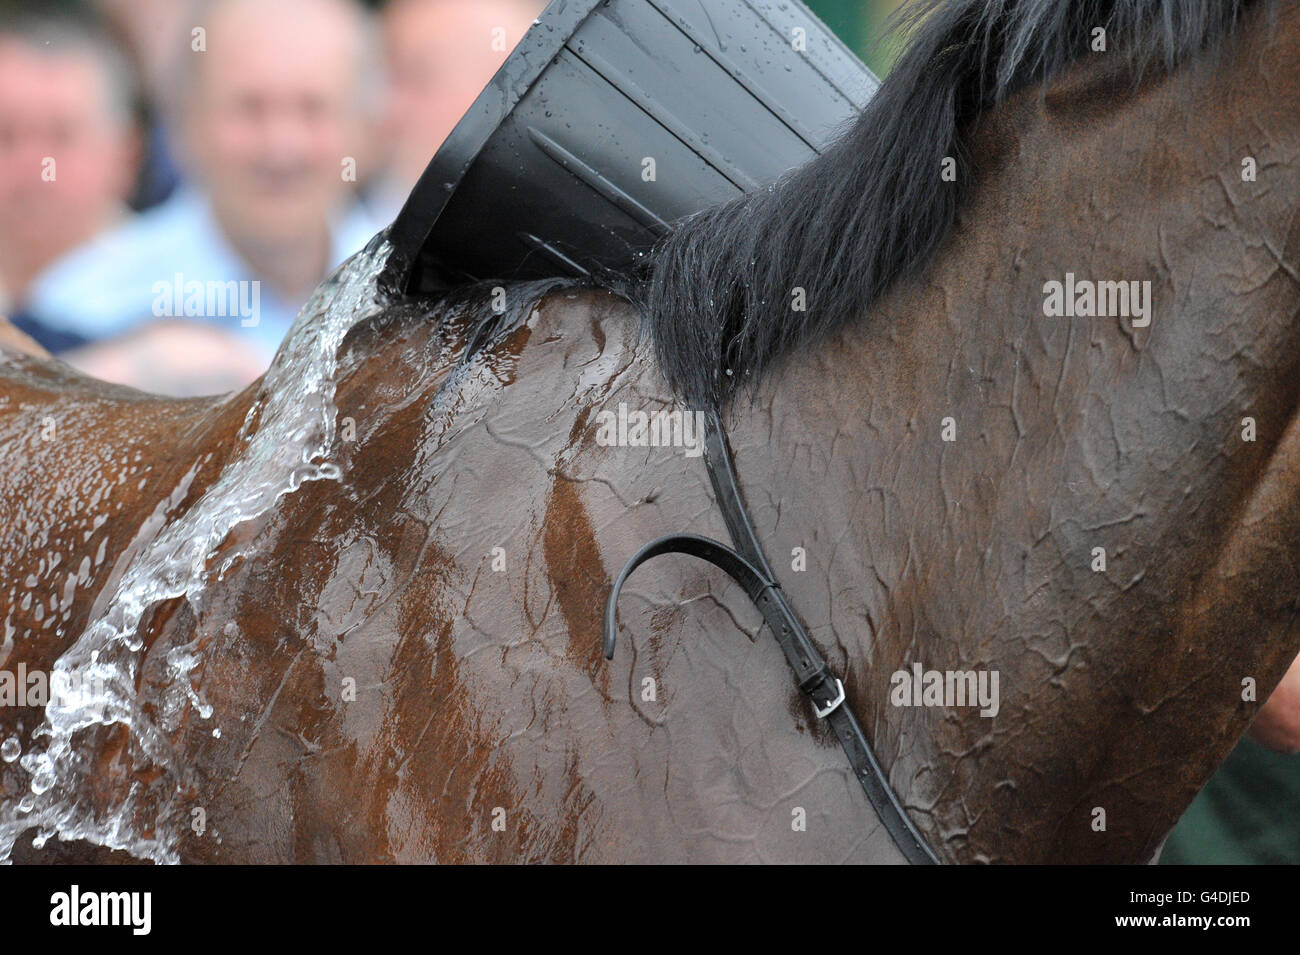 Horse Racing - Wolverhampton Racecourse - 32 For Slots Handicap. A bucket of water is poured on a race horse after a race Stock Photo